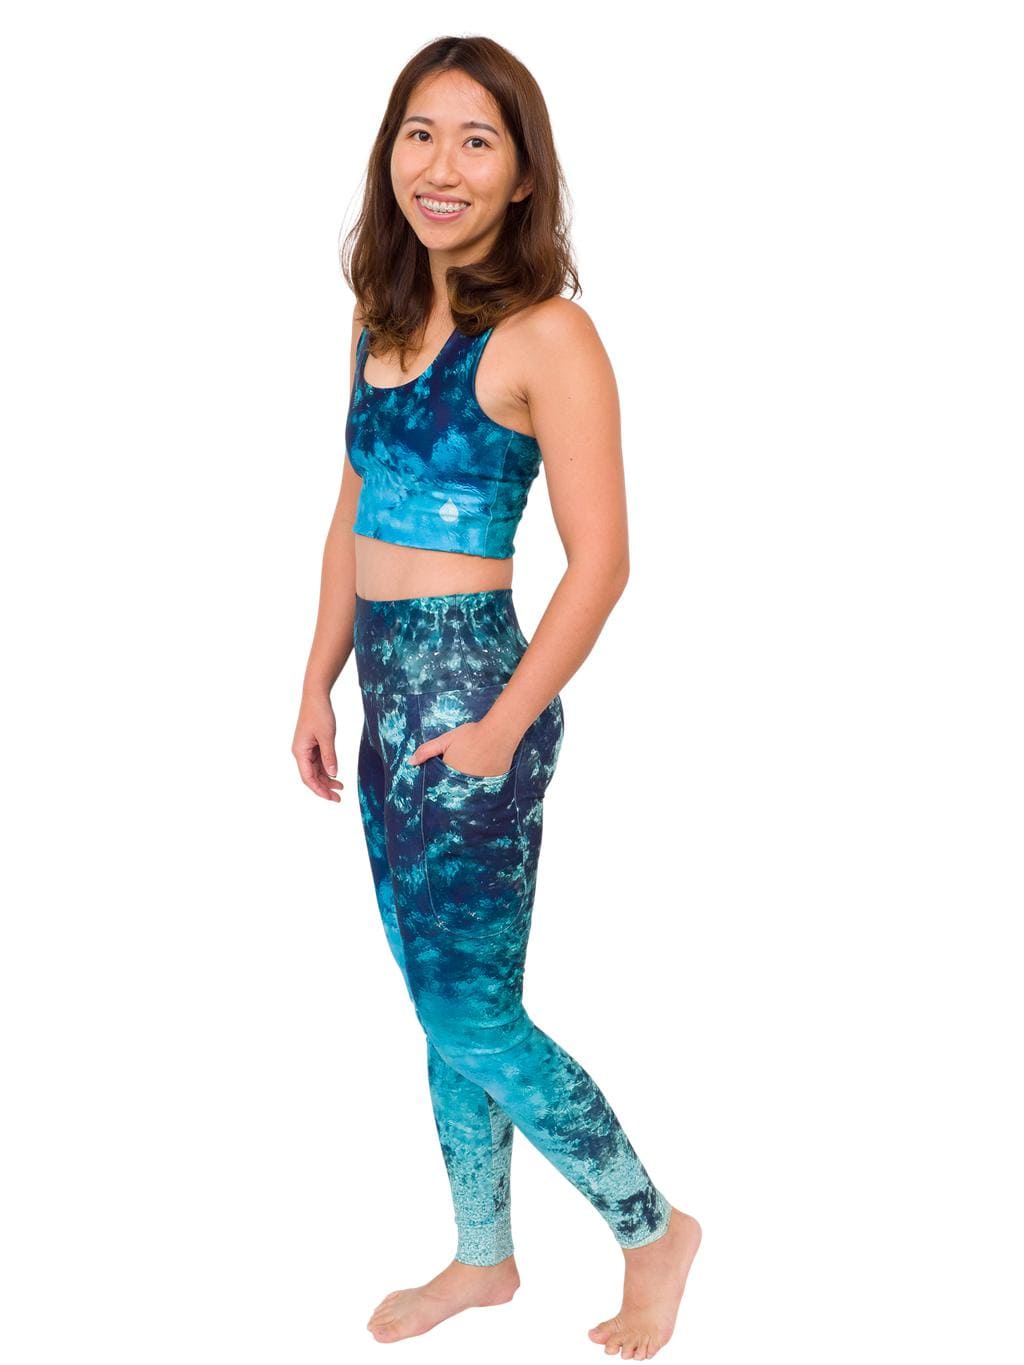 Model: Laura is a hurricane researcher and avid scuba diver. She is 5&#39;3&quot;, 120lbs, 34B and is wearing a S legging and S top.